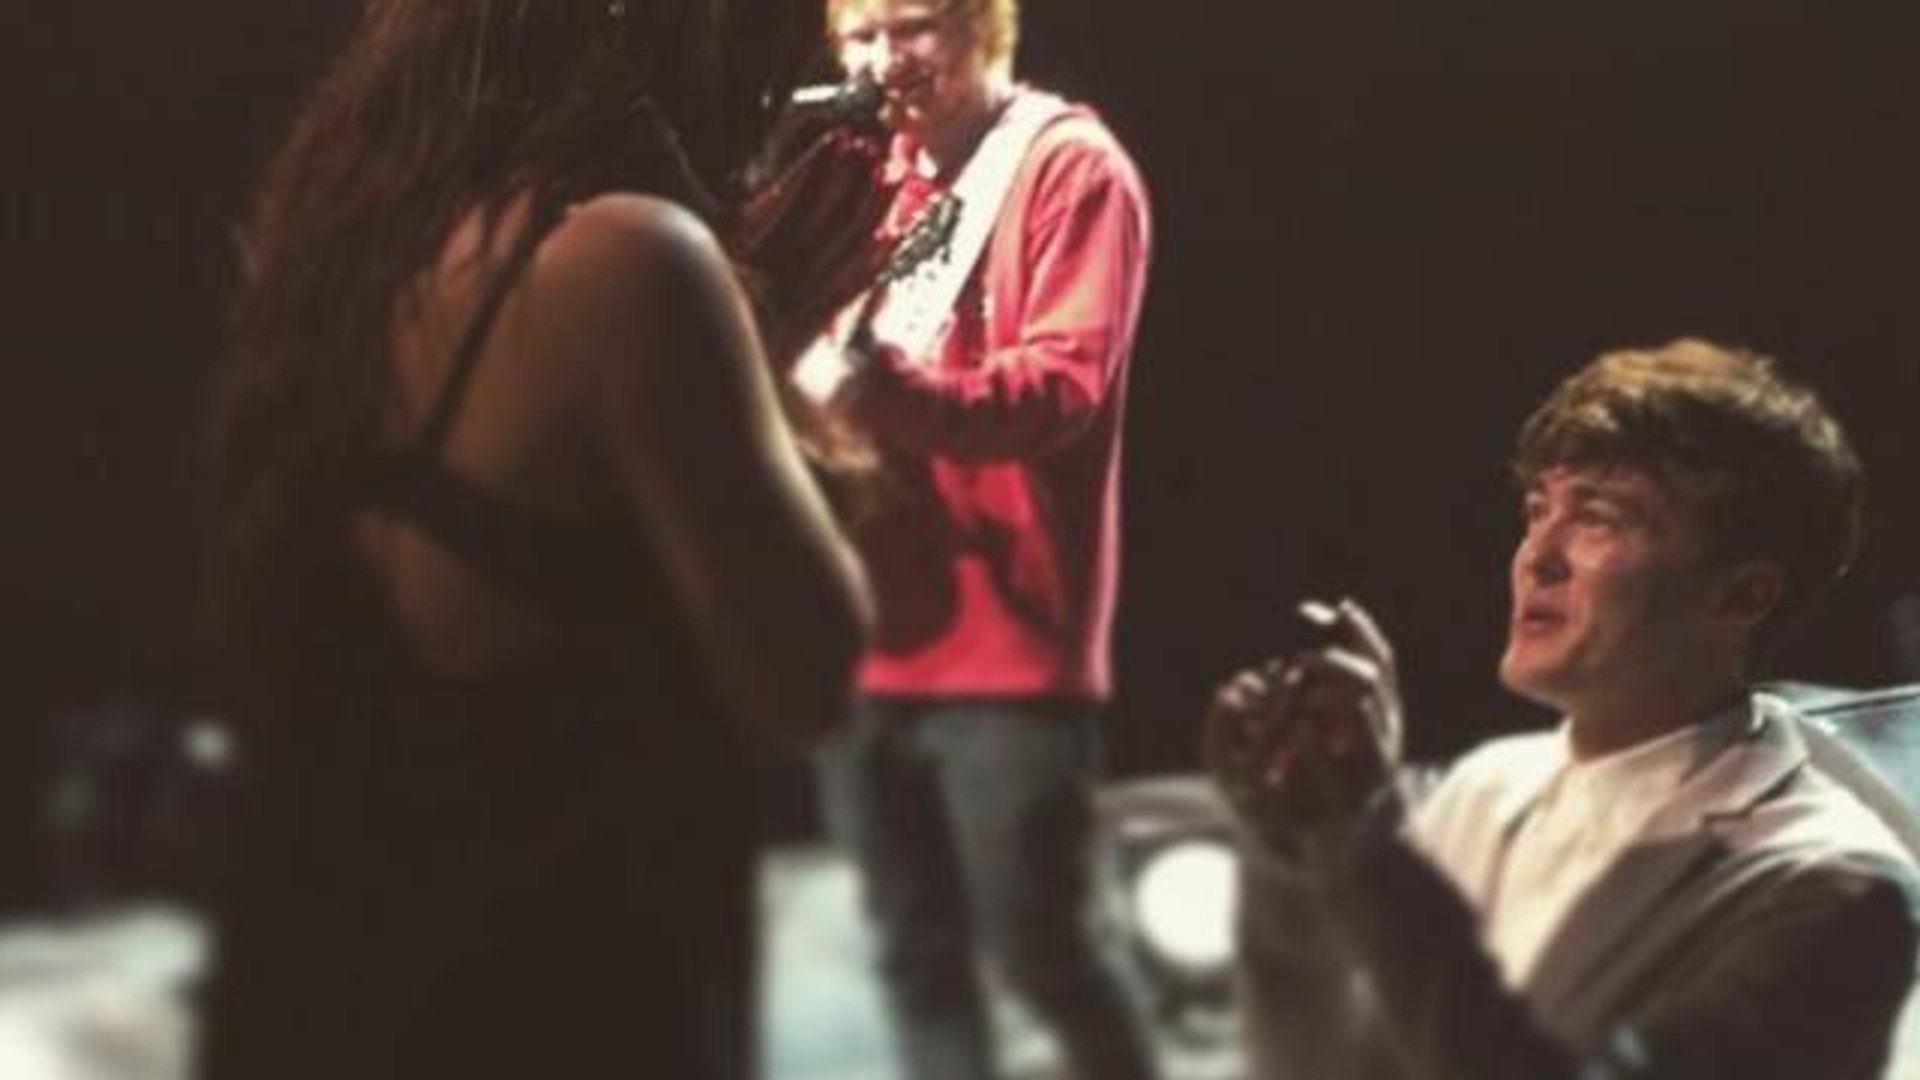 Ed Sheeran helps fellow musician propose to girlfriend on stage